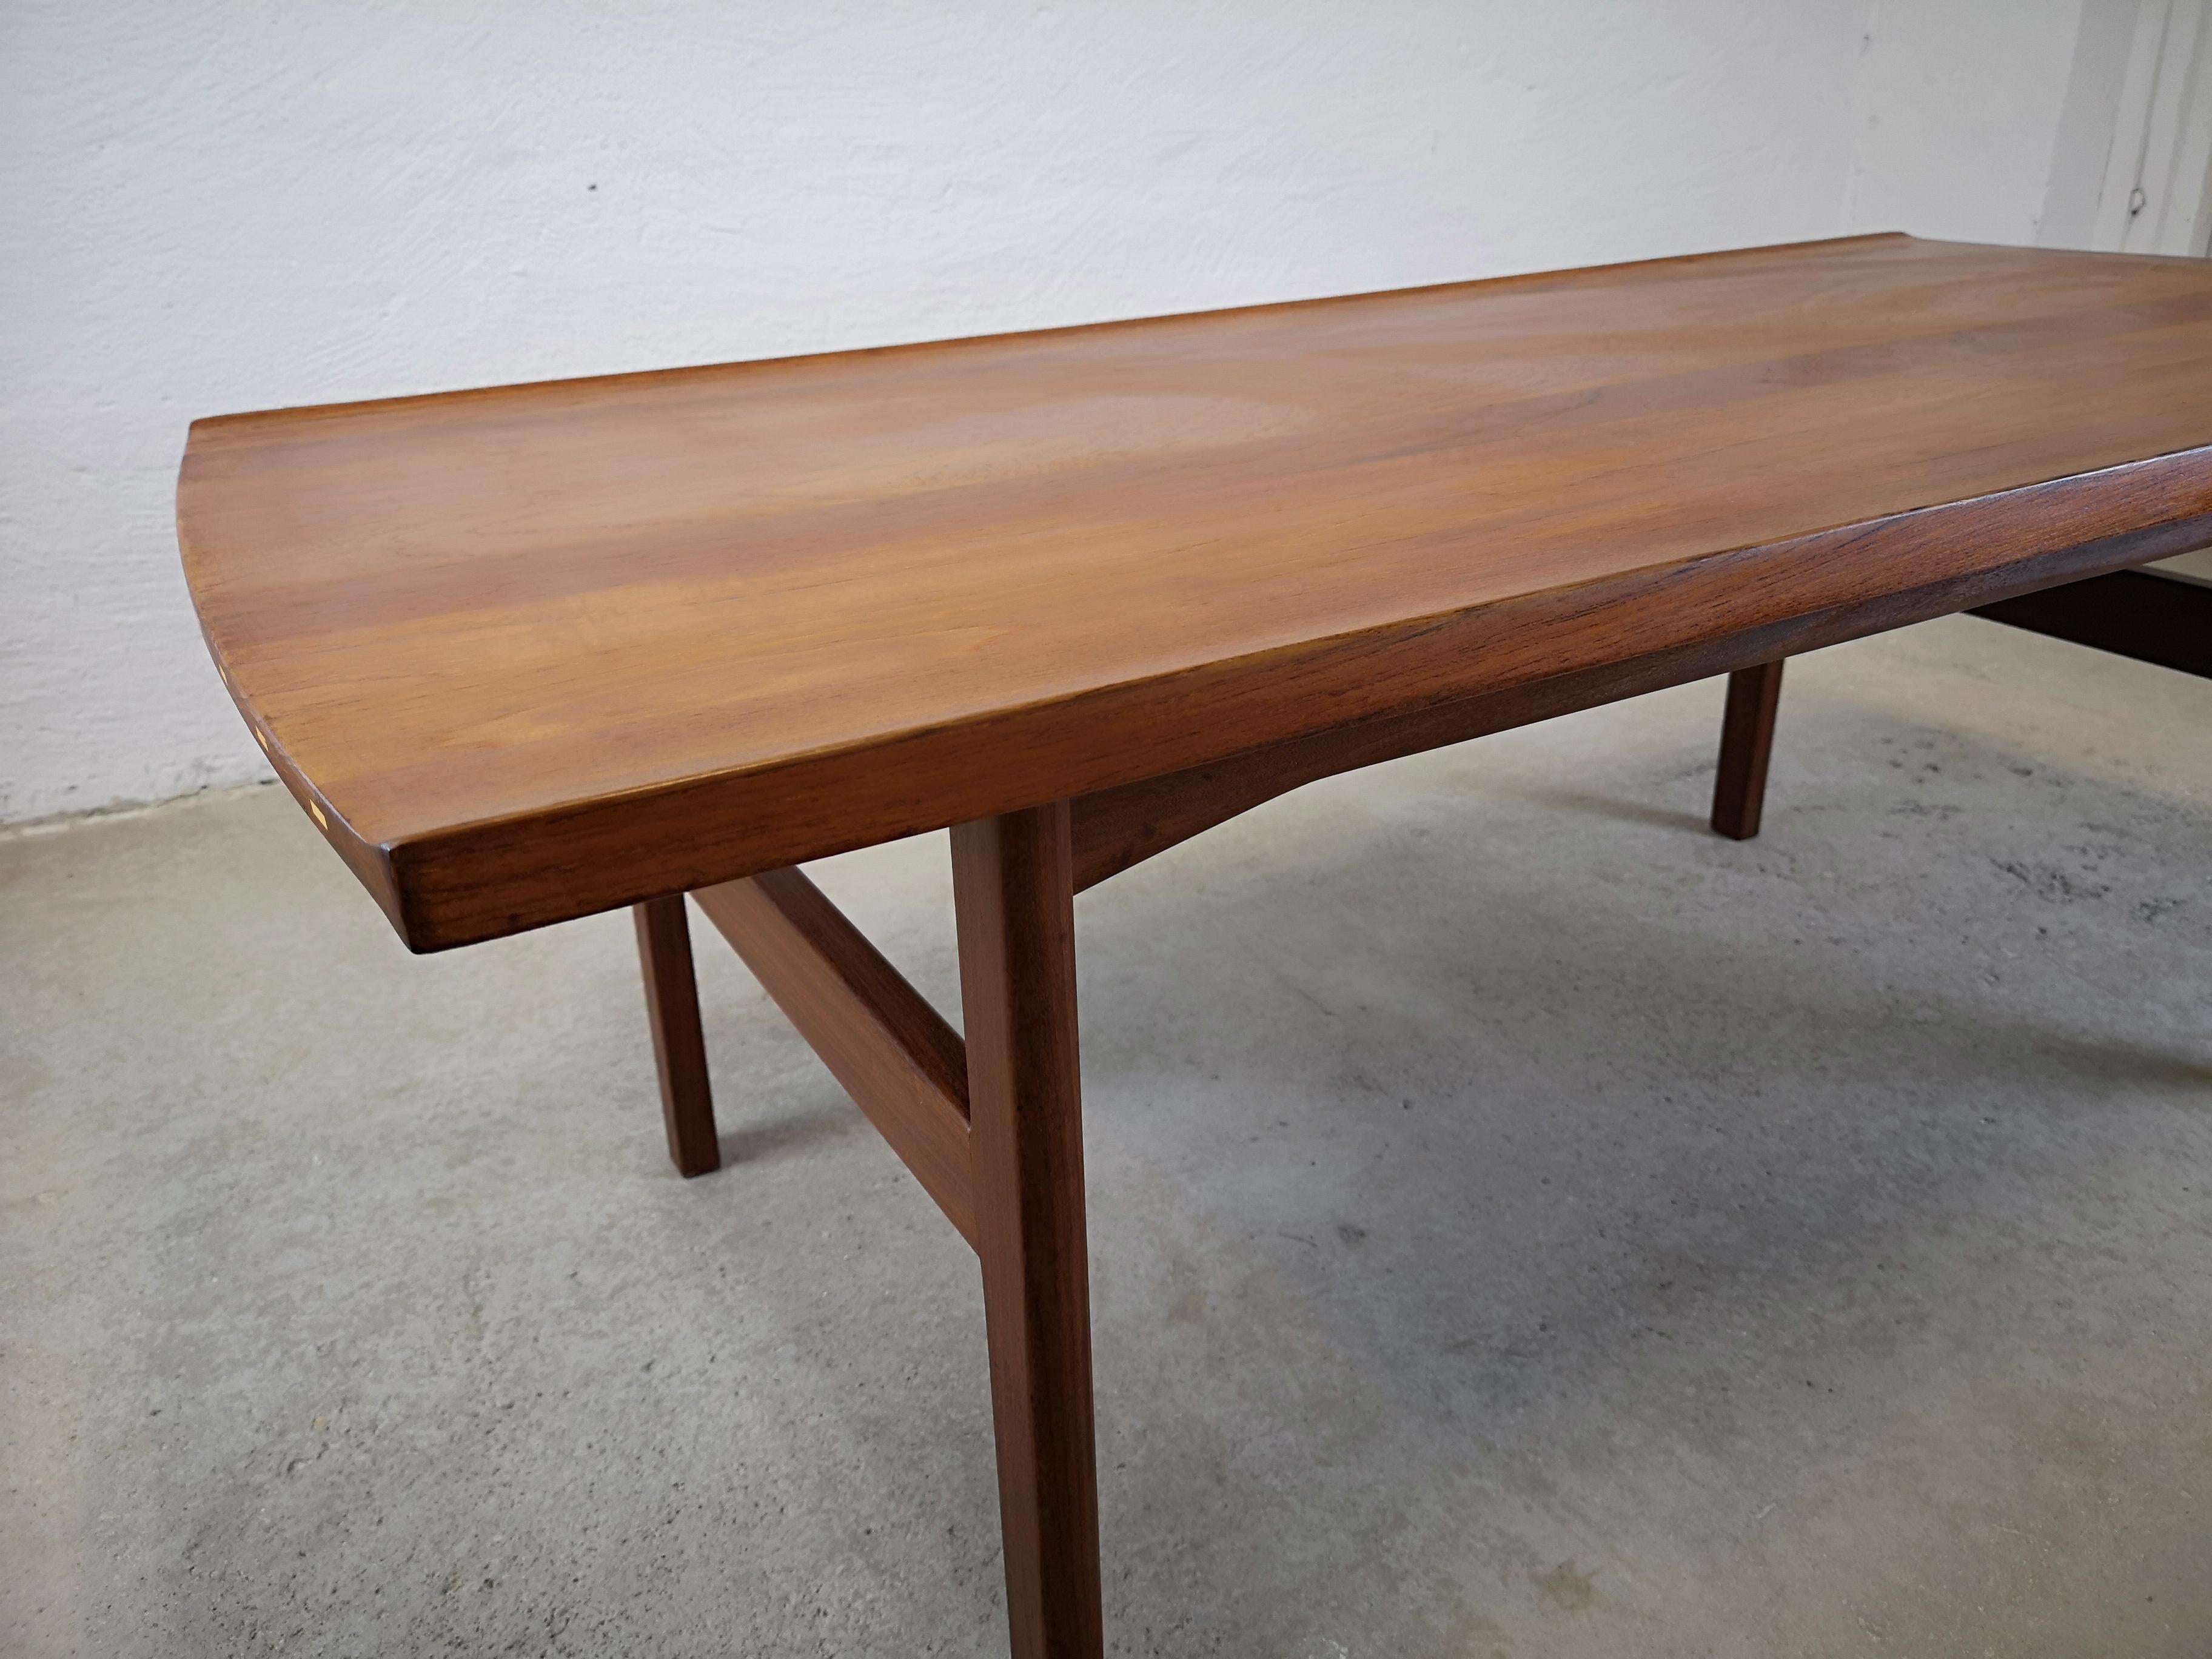 Scandinavian Modern Solid Teak Coffee Table by Tove and Edvard Kindt Larsen